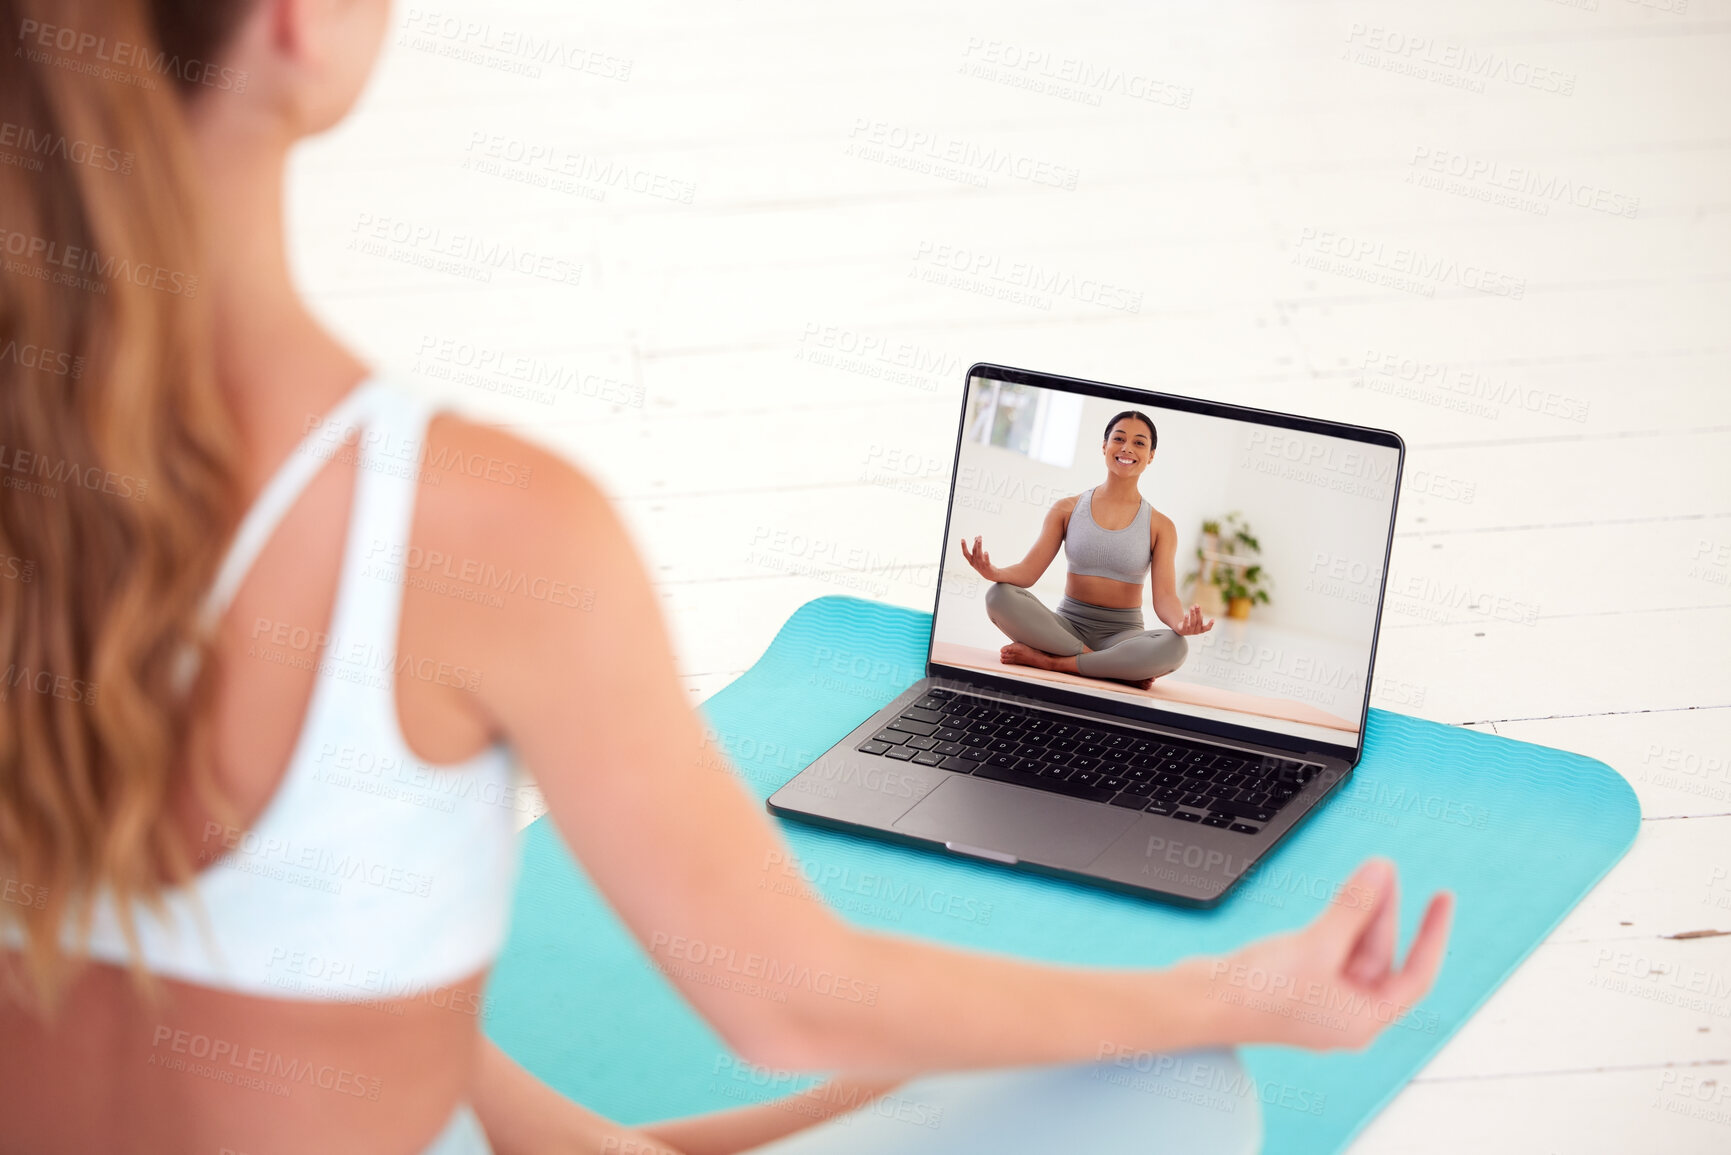 Buy stock photo Yoga, meditation and wellness woman watching coach, teacher or professional health and exercise education video or live stream. Girl training and learning how to relax via online classes on a laptop